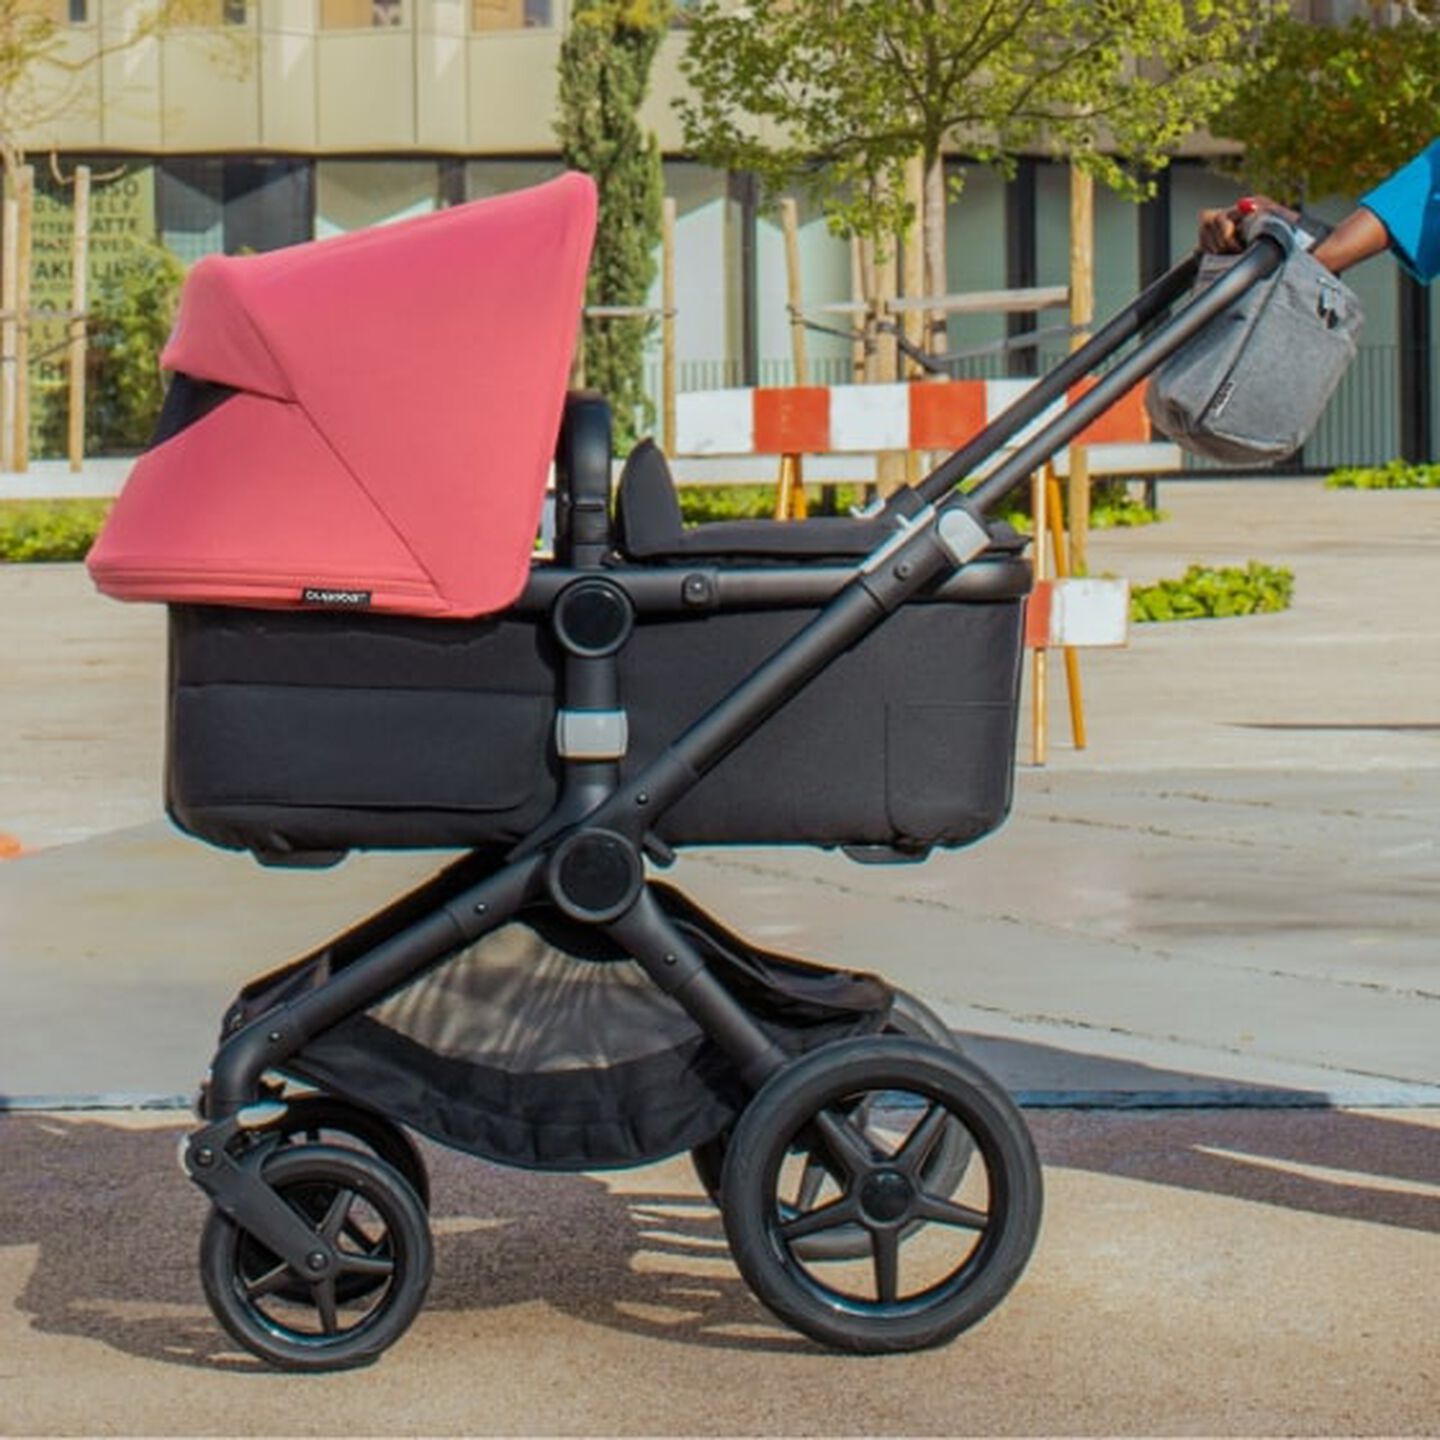 Introducing the Bugaboo Fox 5 🖤🖤 The all-terrain stroller for the be, Bugaboo Stroller